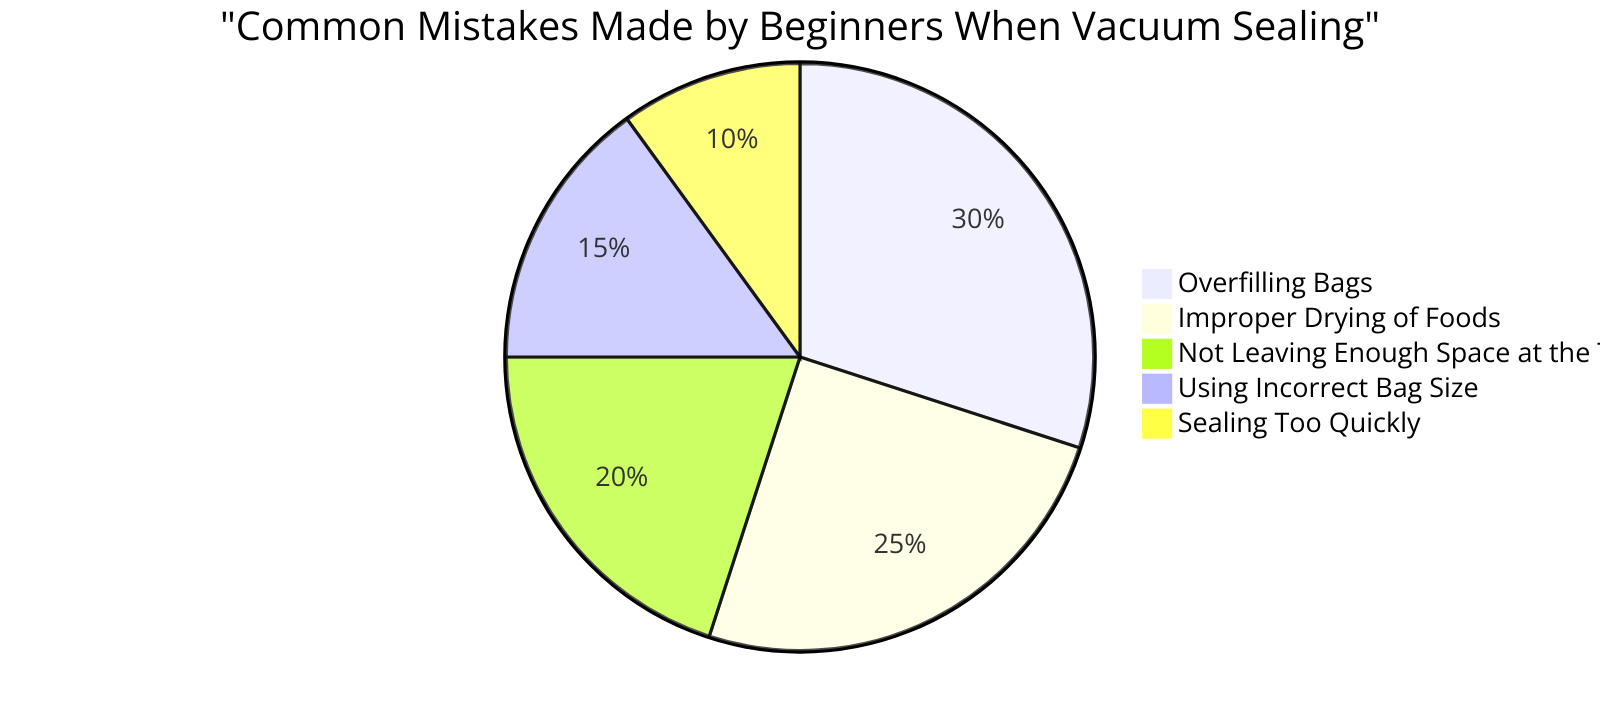 common mistakes made by beginners when vacuum sealing and their percentages, which will help readers avoid these pitfalls